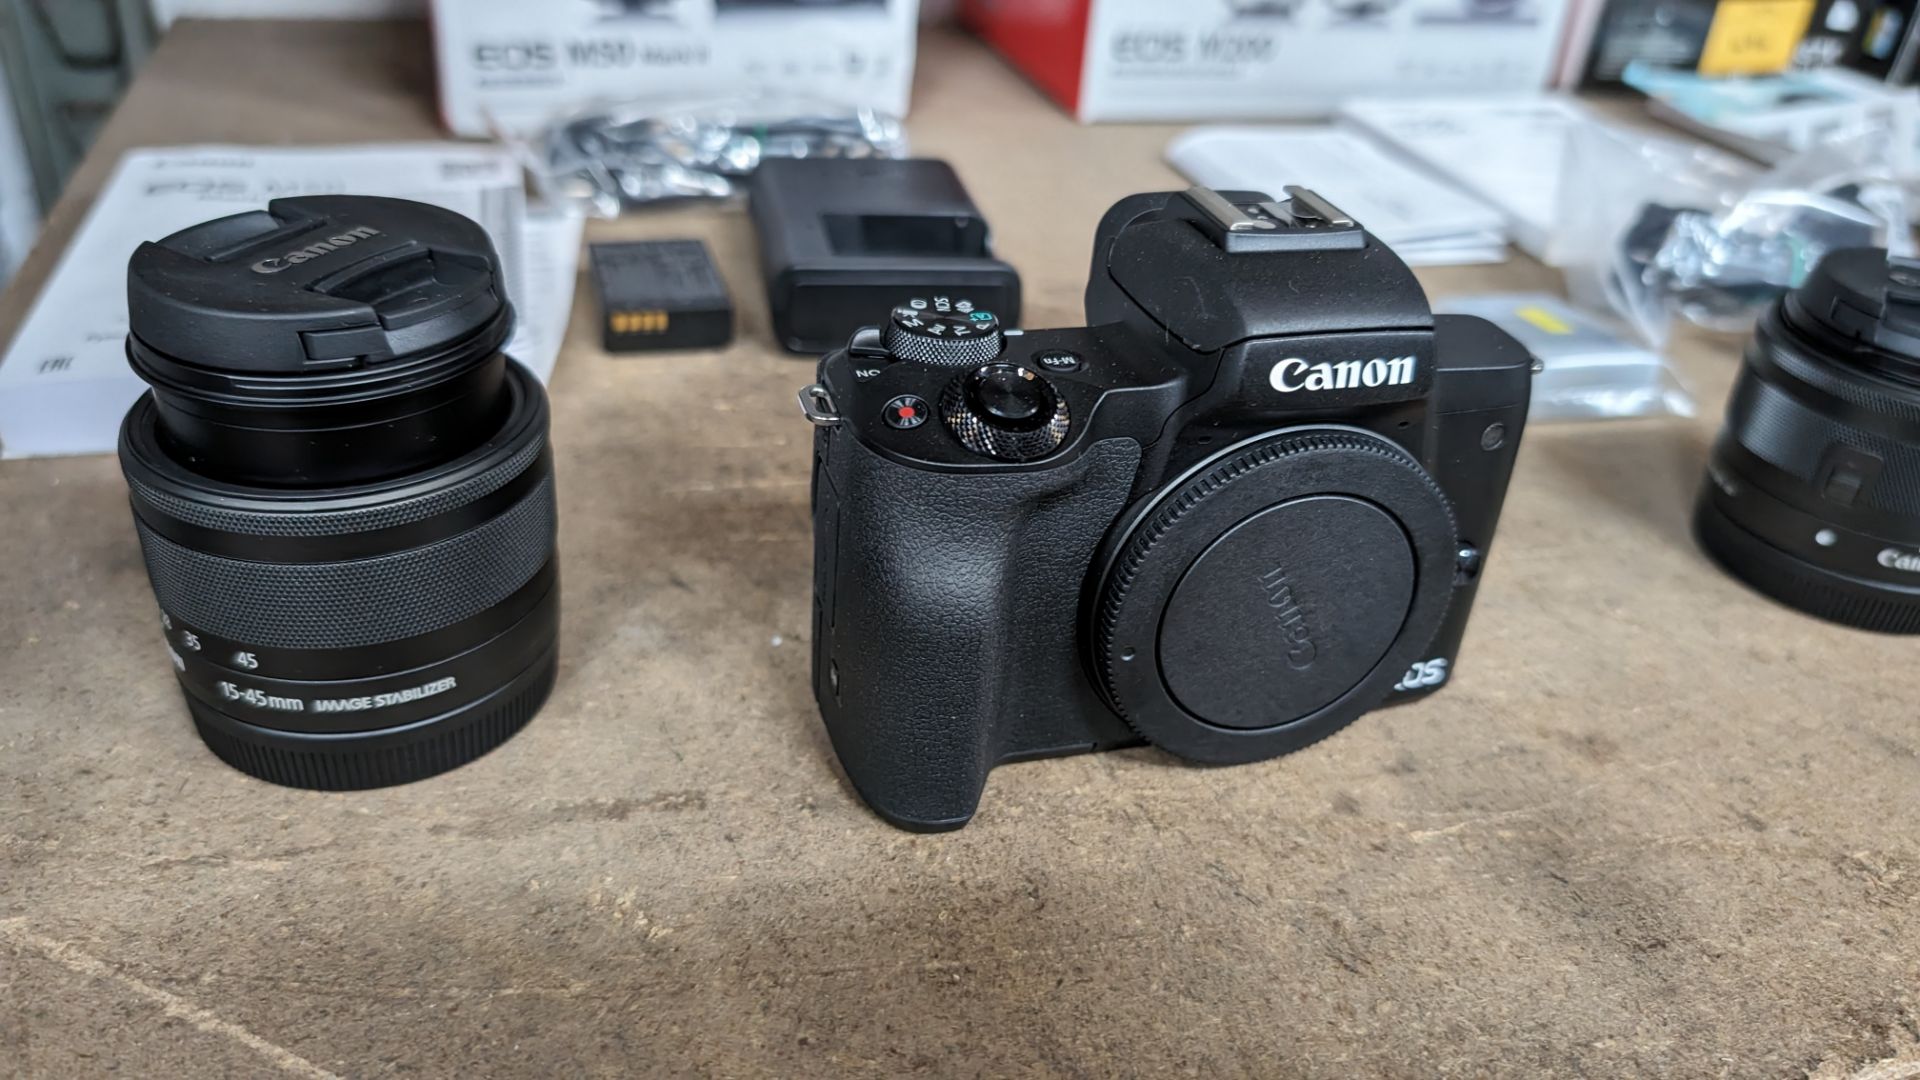 Canon EOS M50 MARK II camera, including 15-45mm image stabilizer lens, plus battery and charger - Image 4 of 14